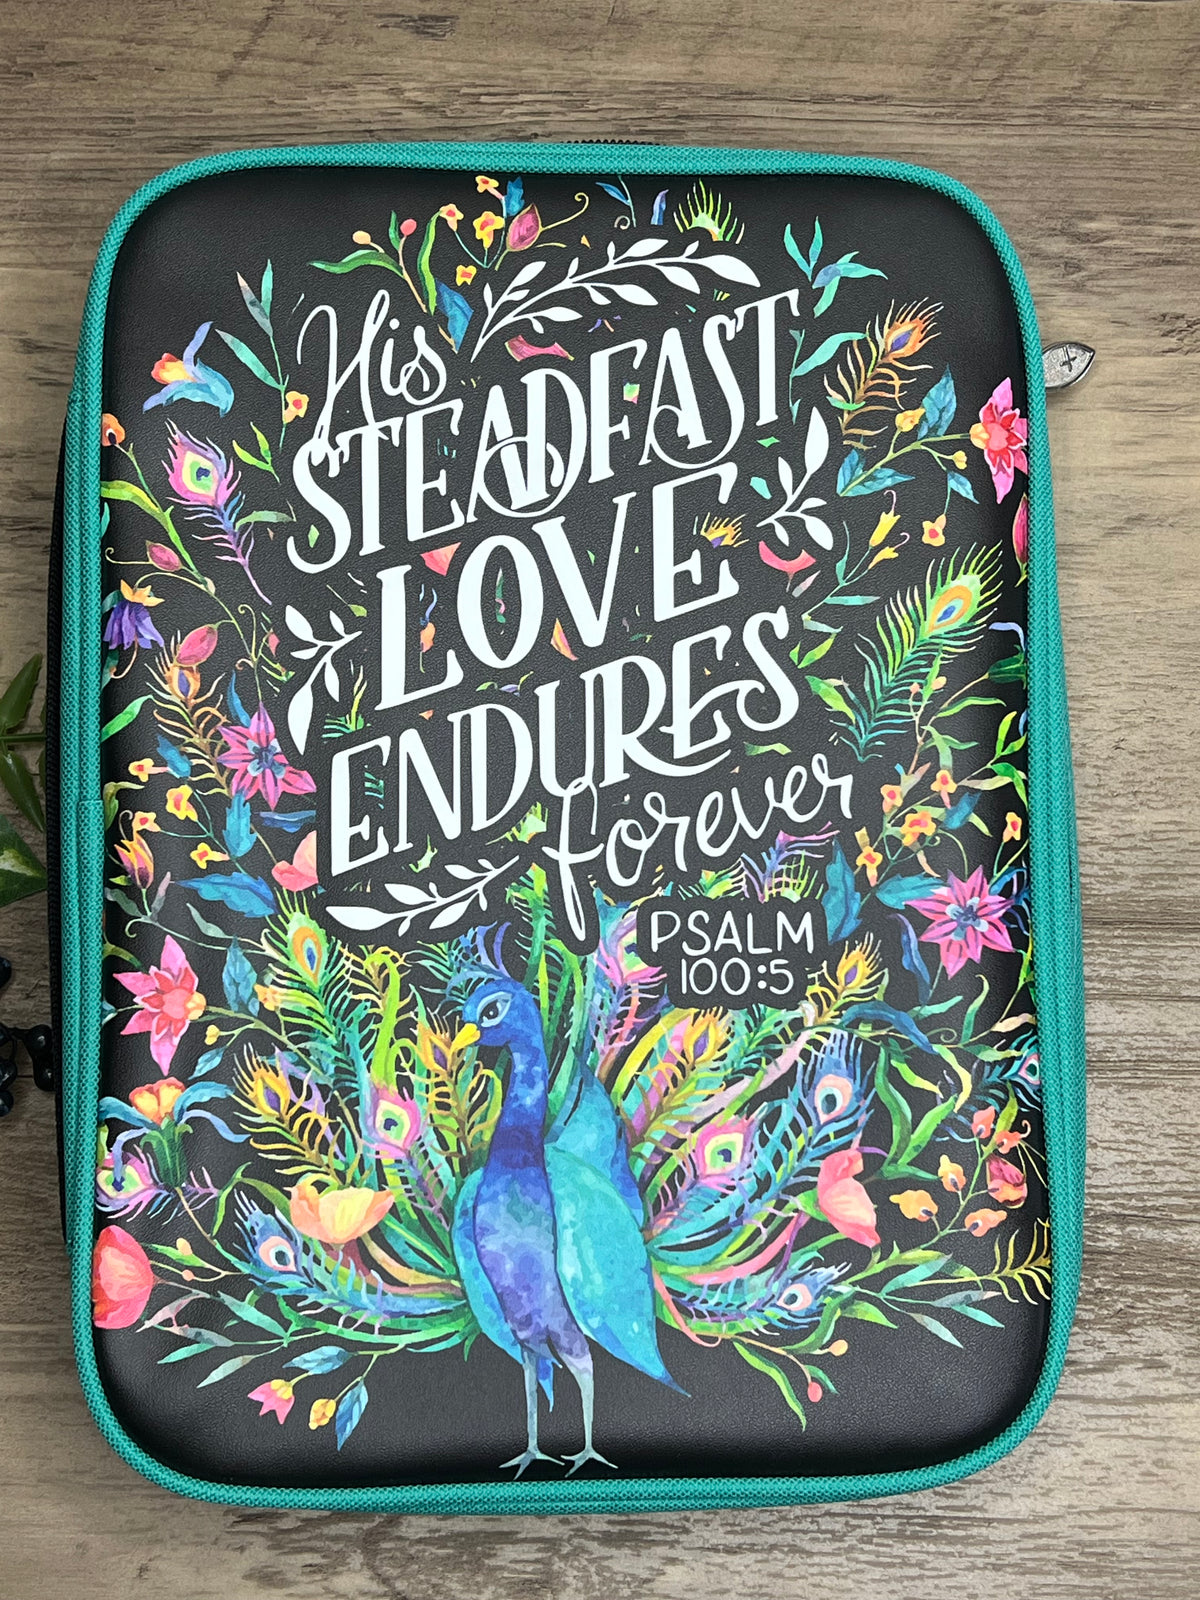 His Steadfast Bible Cover